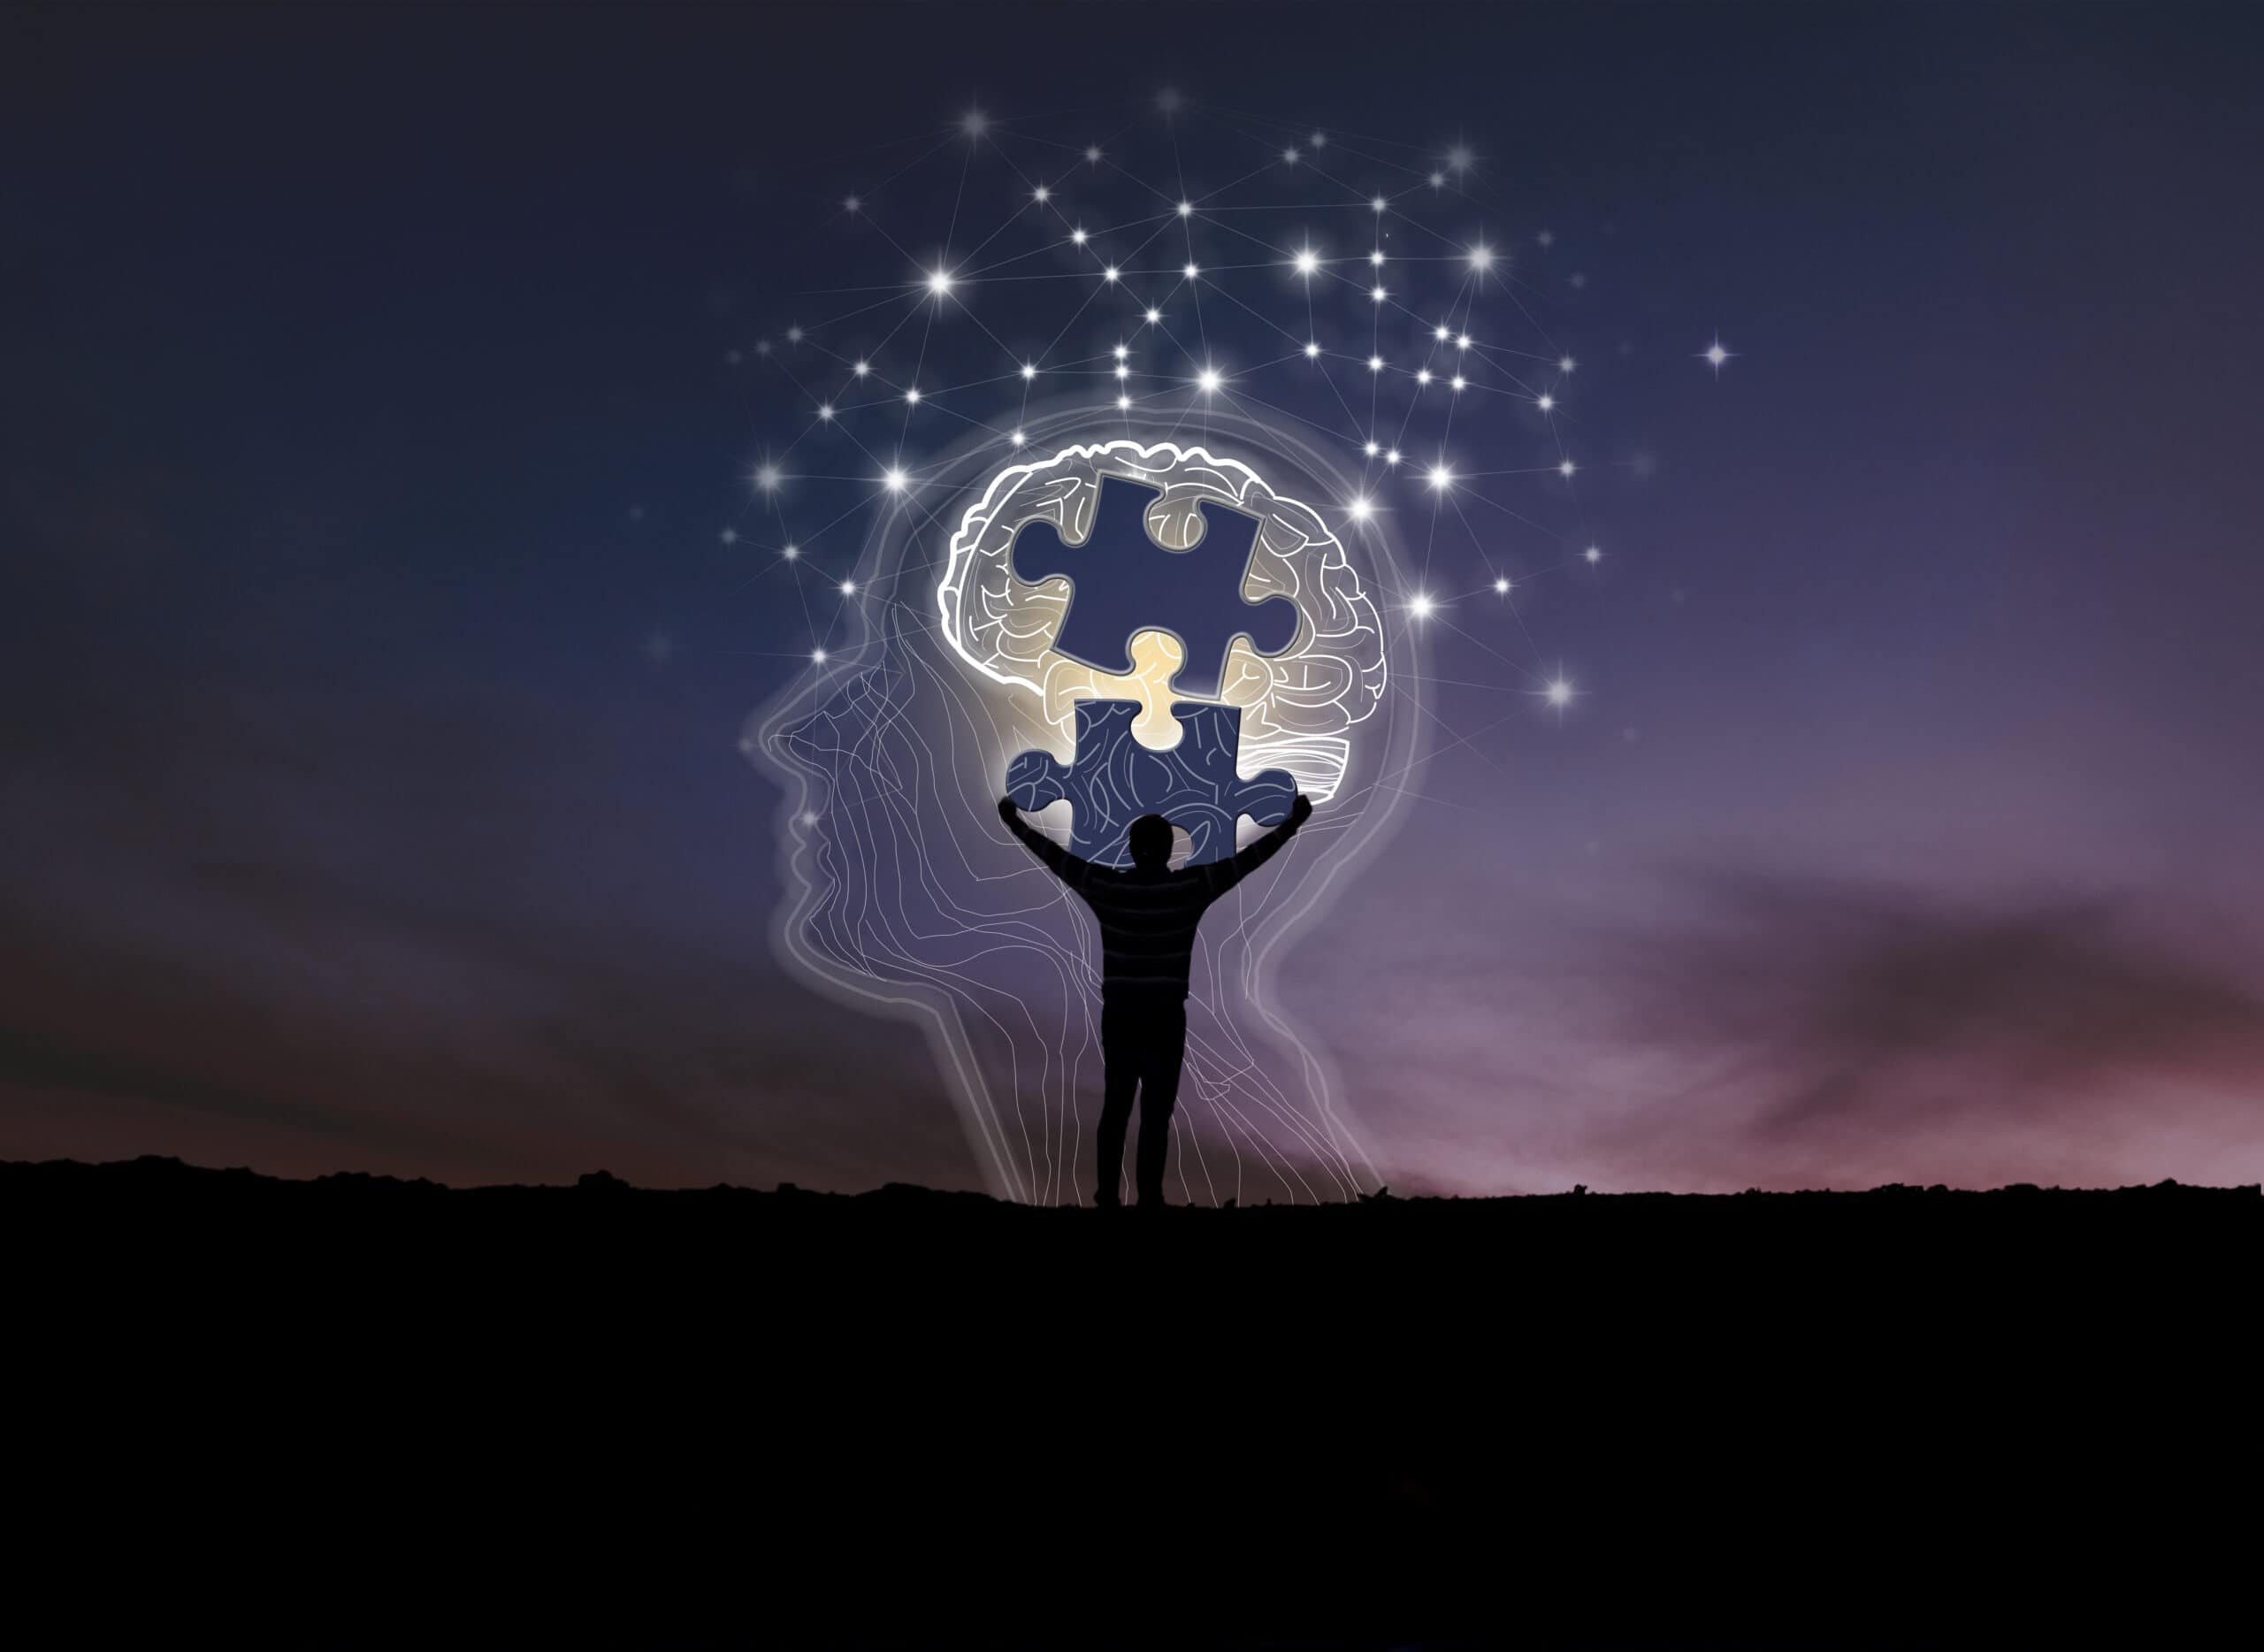 Picture of night sky with illuminated head and brain outline with a missing puzzle piece. Silhouette holding up the missing puzzle piece